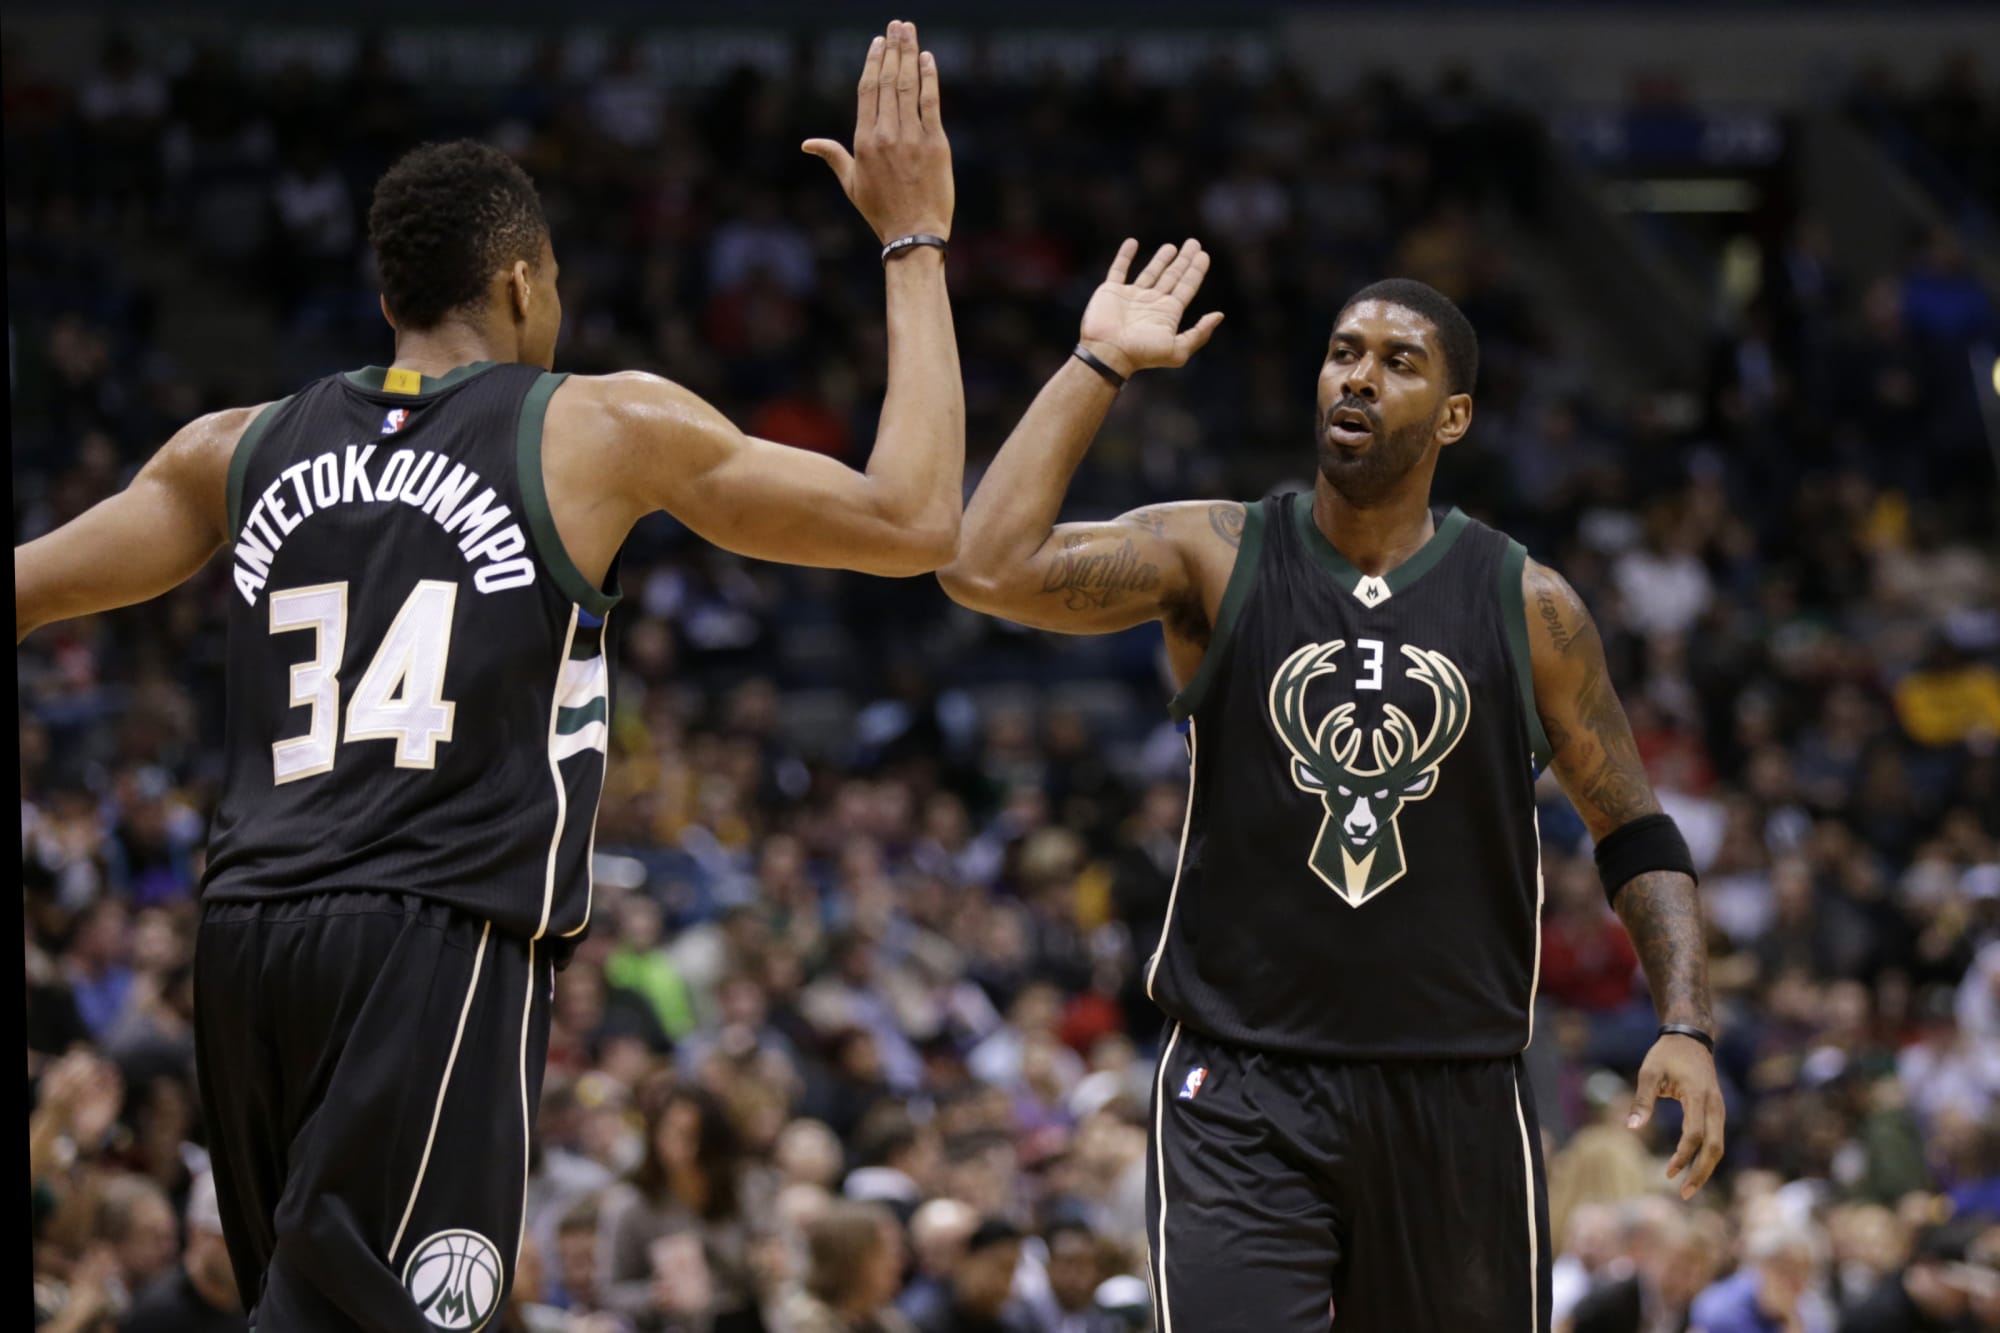 Gallery: O.J. Mayo through the years, Photo Galleries